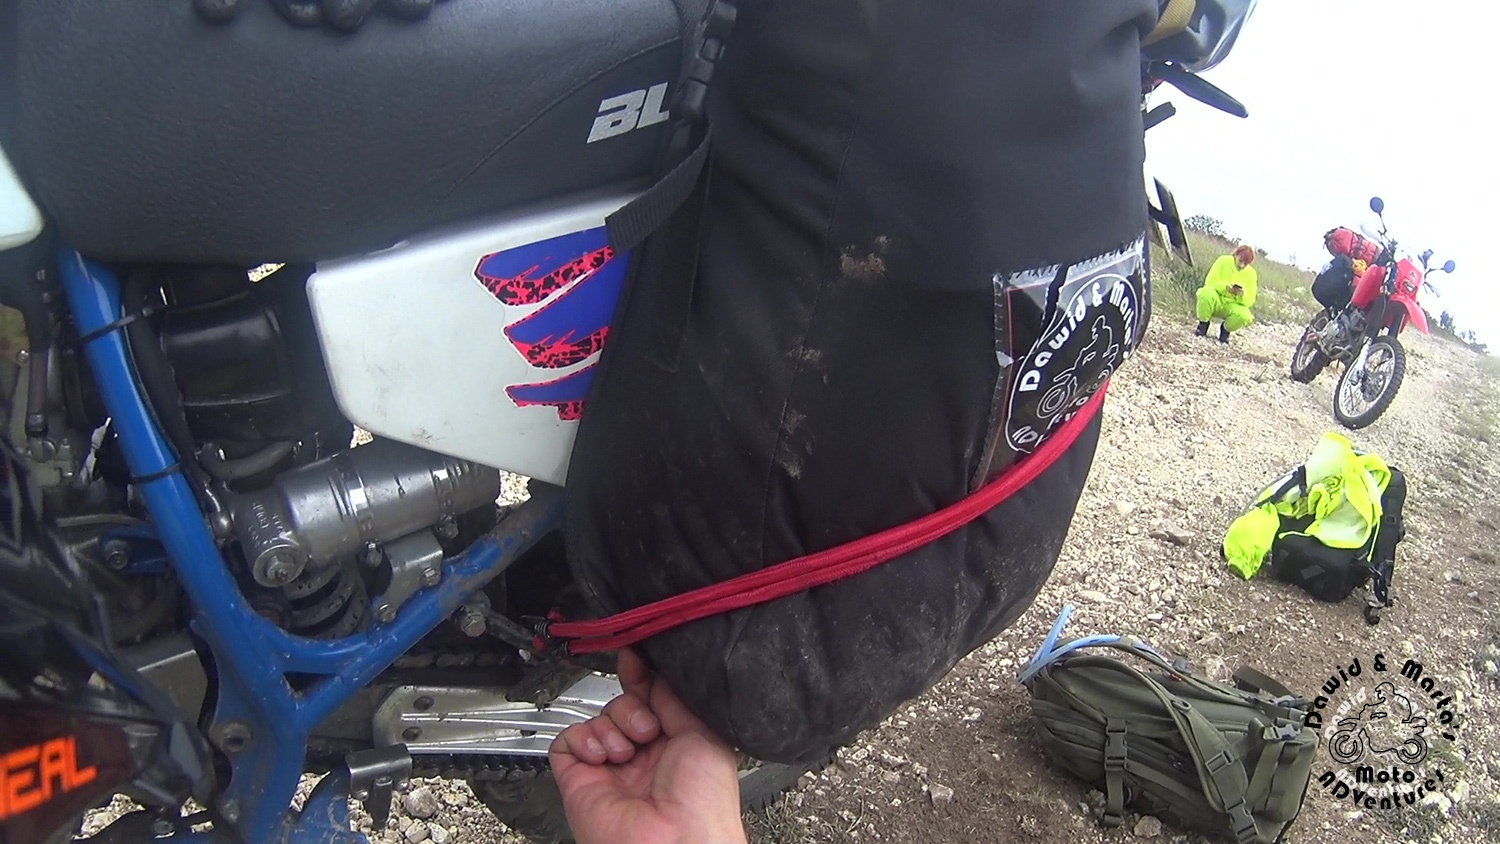 Saving the bike's side bag with spare ropes